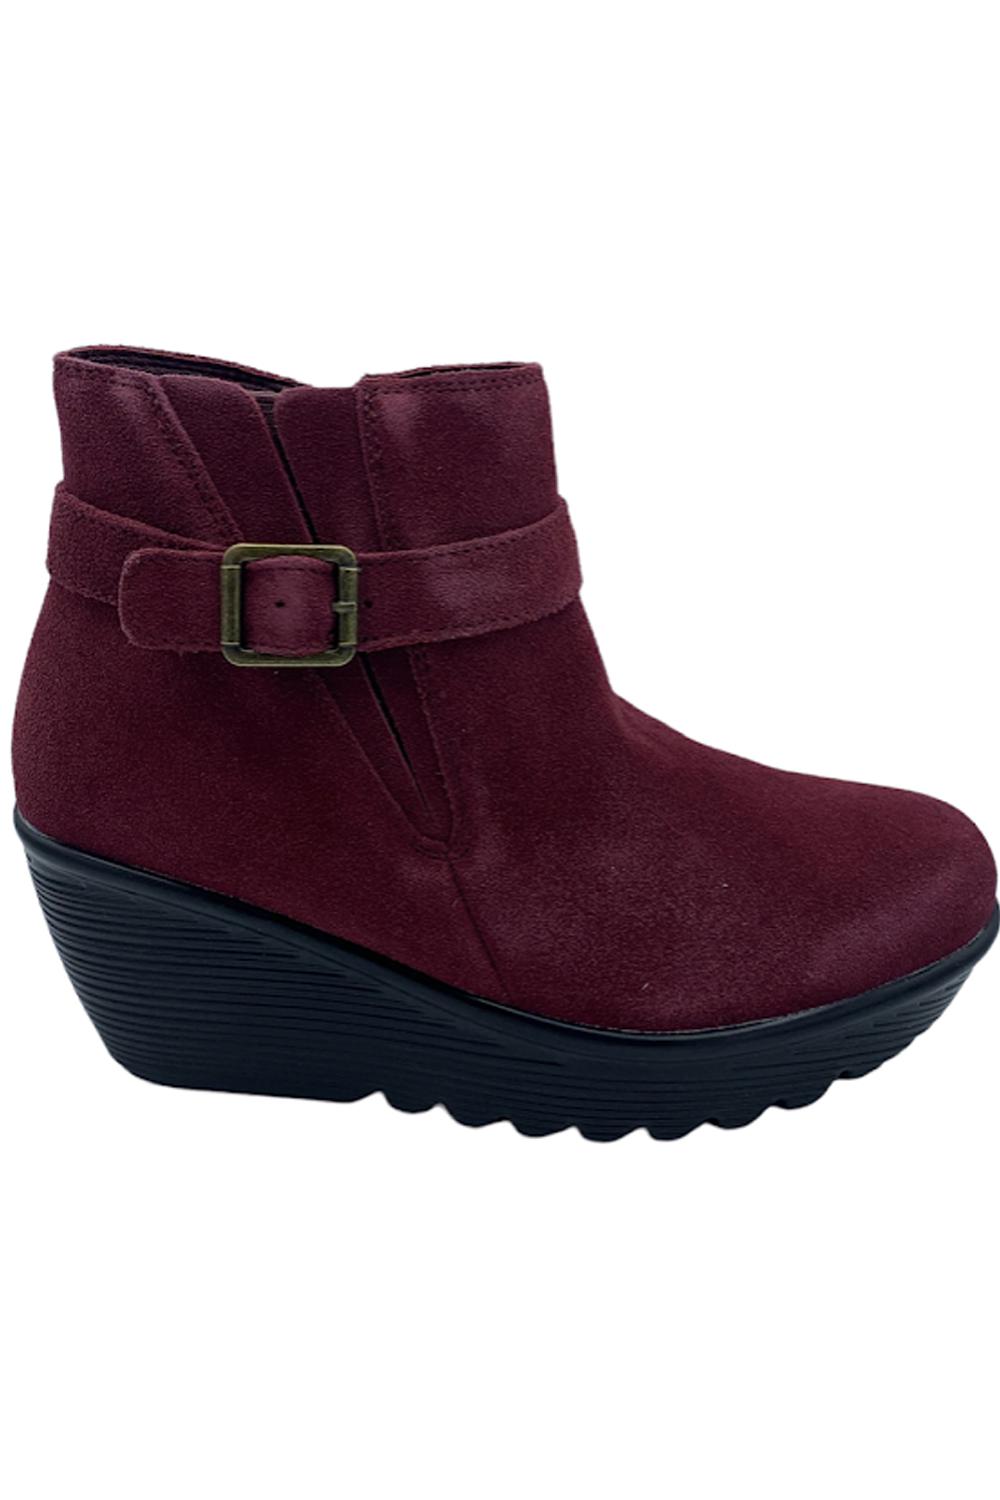 Skechers Suede Parallel Ankle Boots Day Date Burgundy Jender